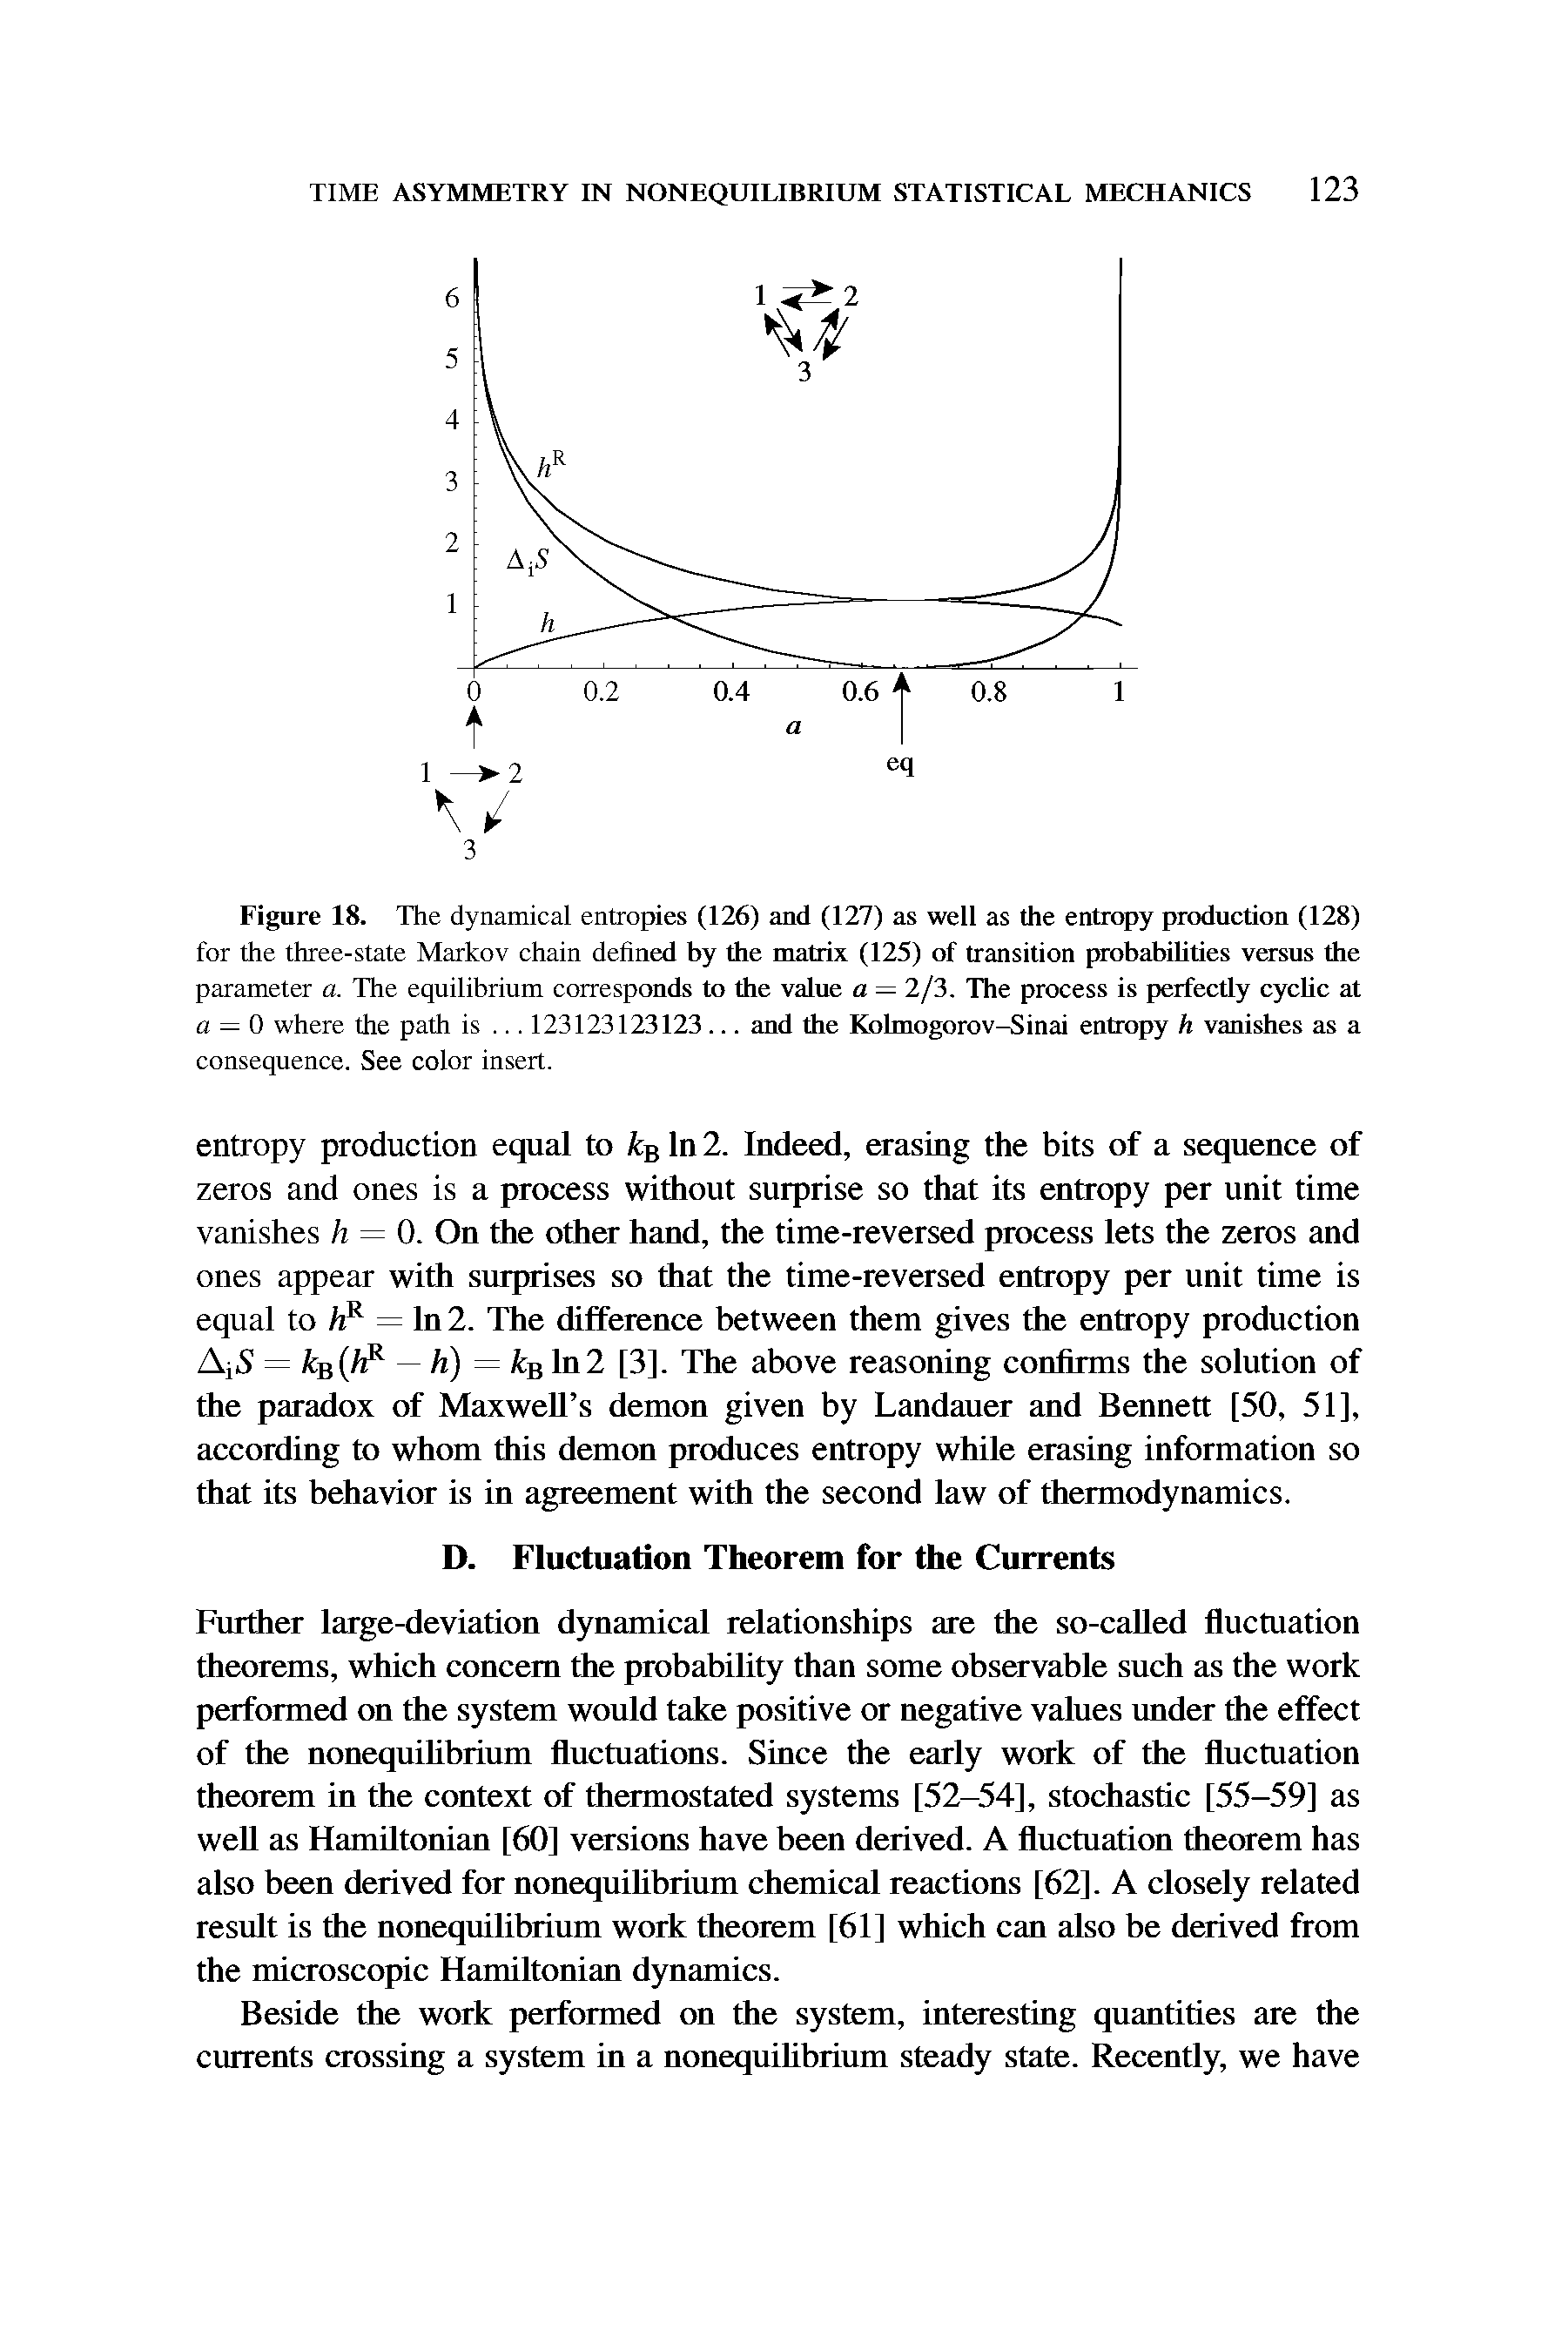 Figure 18. The dynamical entropies (126) and (127) as well as the entropy production (128) for the three-state Markov chain defined by the matrix (125) of transition probabilities versus the parameter a. The equilibrium corresponds to the value a — Ij i. The process is perfectly cyclic at a = 0 where the path is. .. 123123123123. .. and the Kohnogorov-Sinai entropy h vanishes as a...